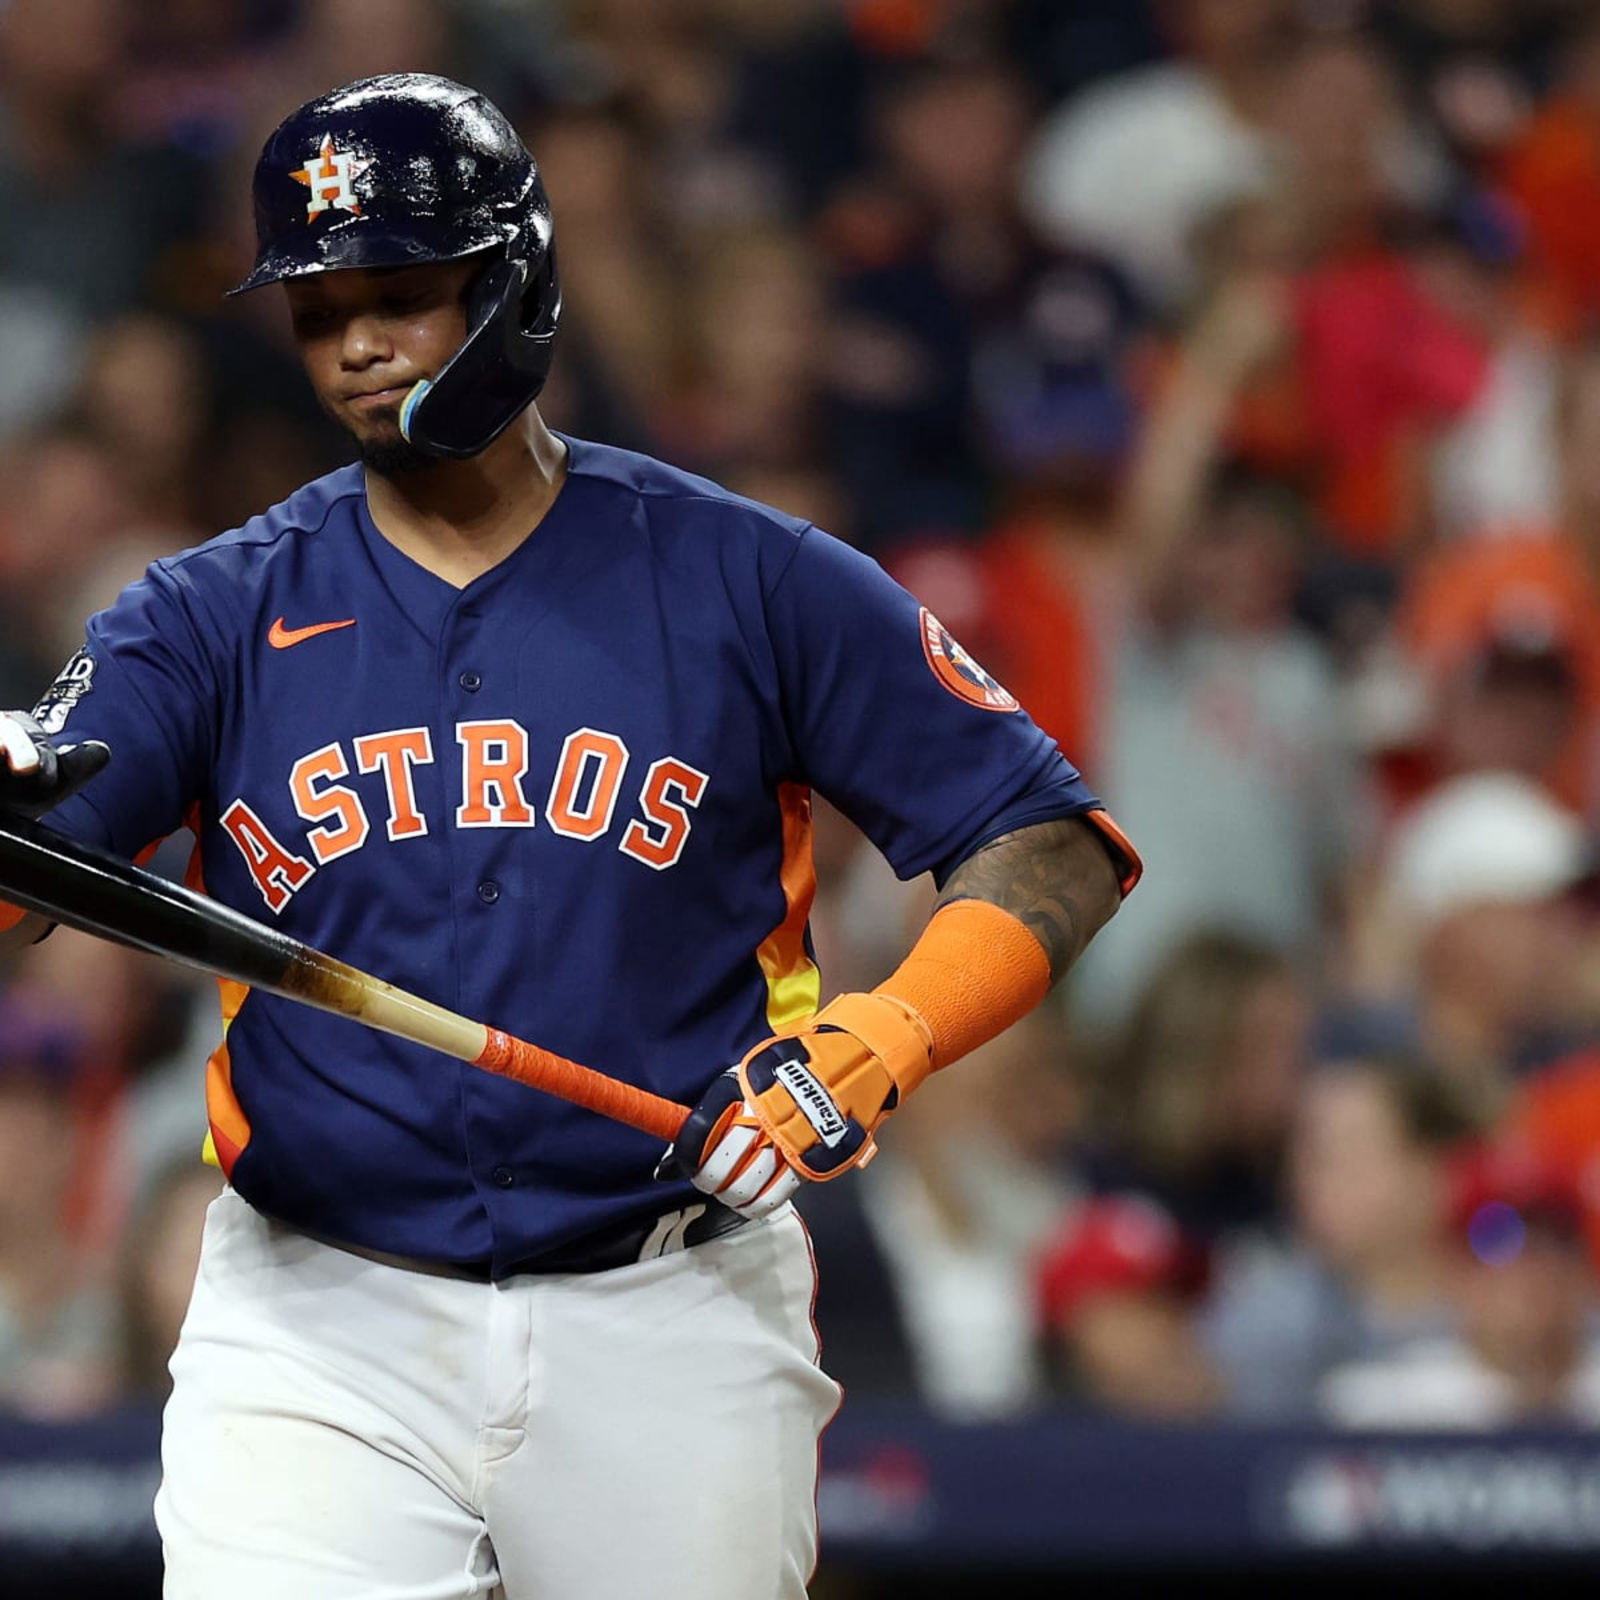 Martín Maldonado delivers for Astros after gift from Albert Pujols